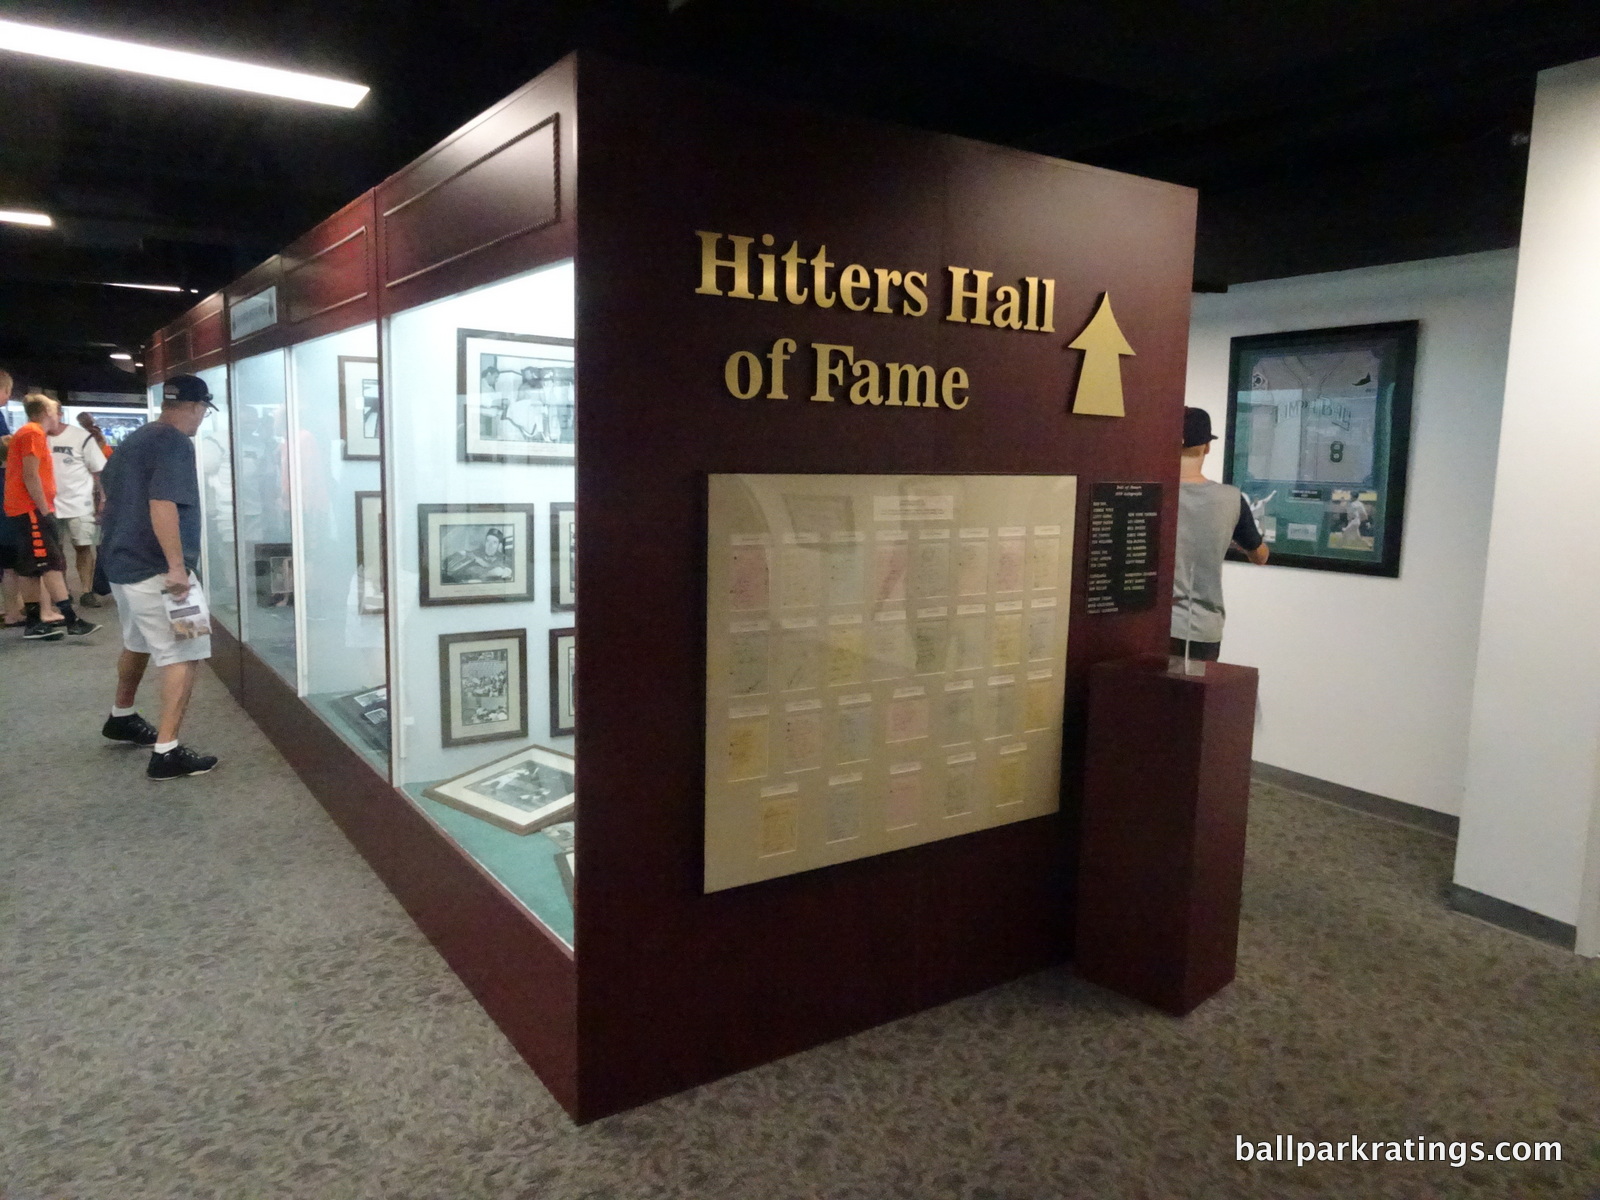 The Ted Williams Museum and Hitters' Hall of Fame